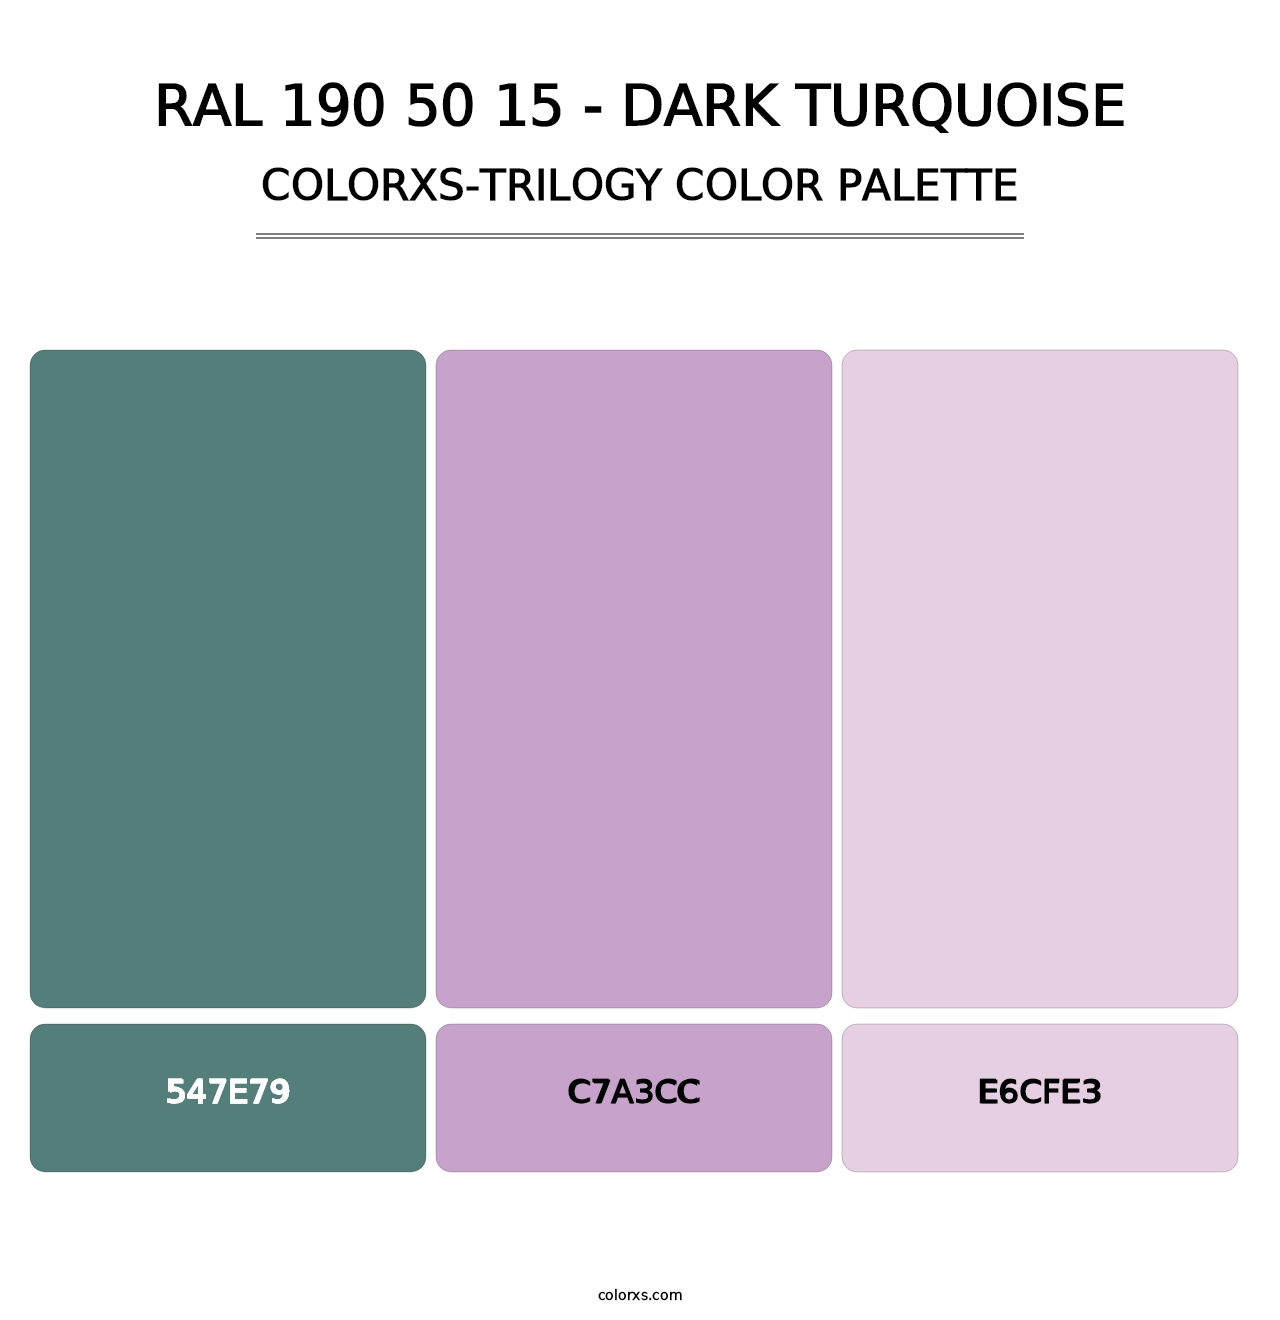 RAL 190 50 15 - Dark Turquoise - Colorxs Trilogy Palette